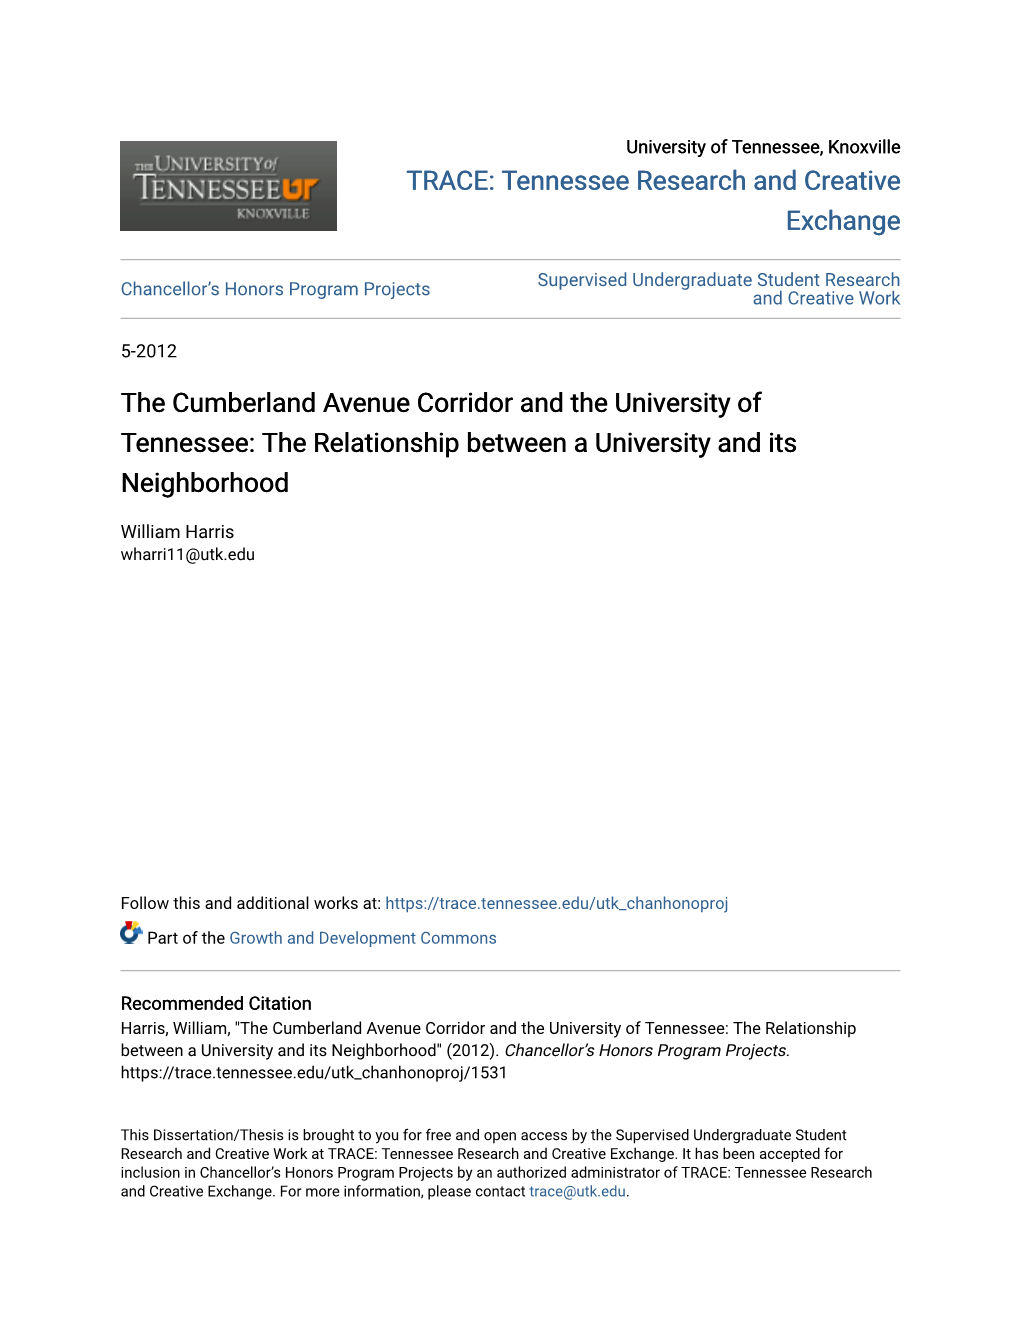 The Cumberland Avenue Corridor and the University of Tennessee: the Relationship Between a University and Its Neighborhood